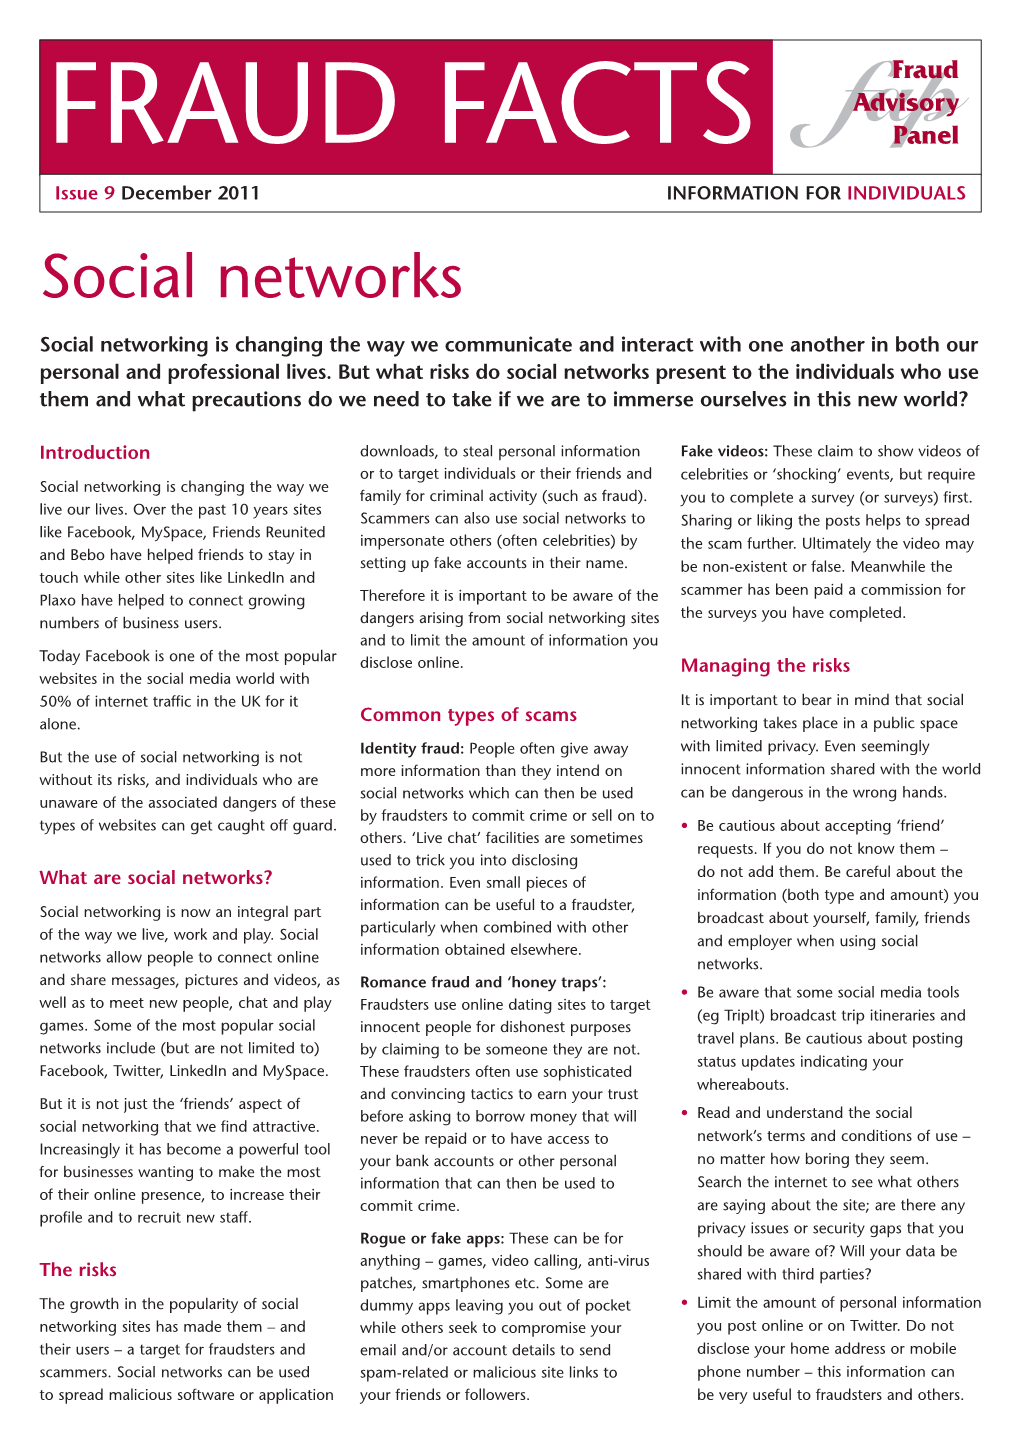 FRAUD FACTS Issue 9 December 2011 INFORMATION for INDIVIDUALS Social Networks